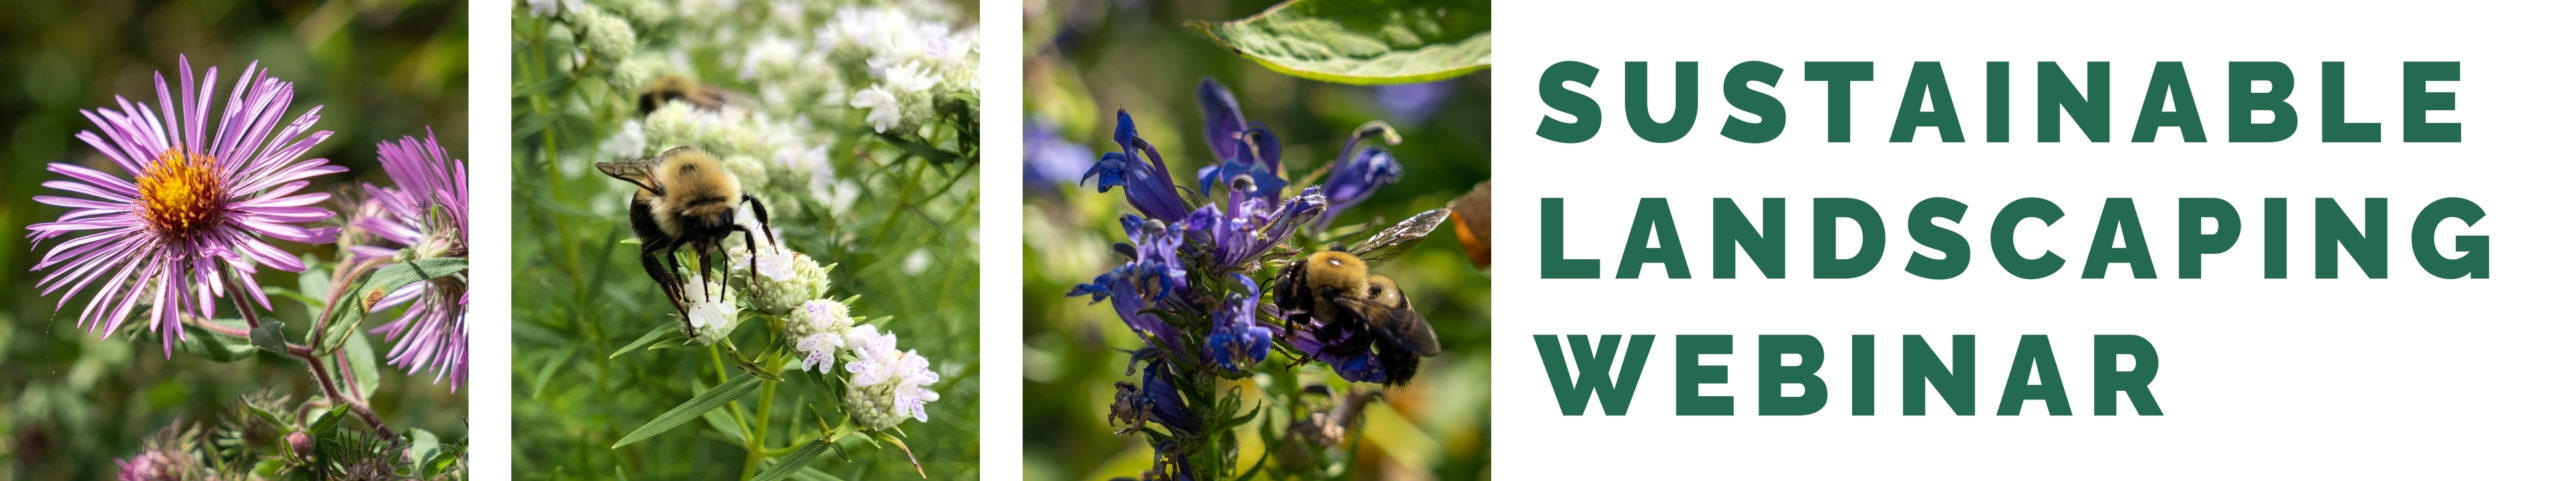 graphic with native flowers and bees with text that says "sustainable landscaping webinar"